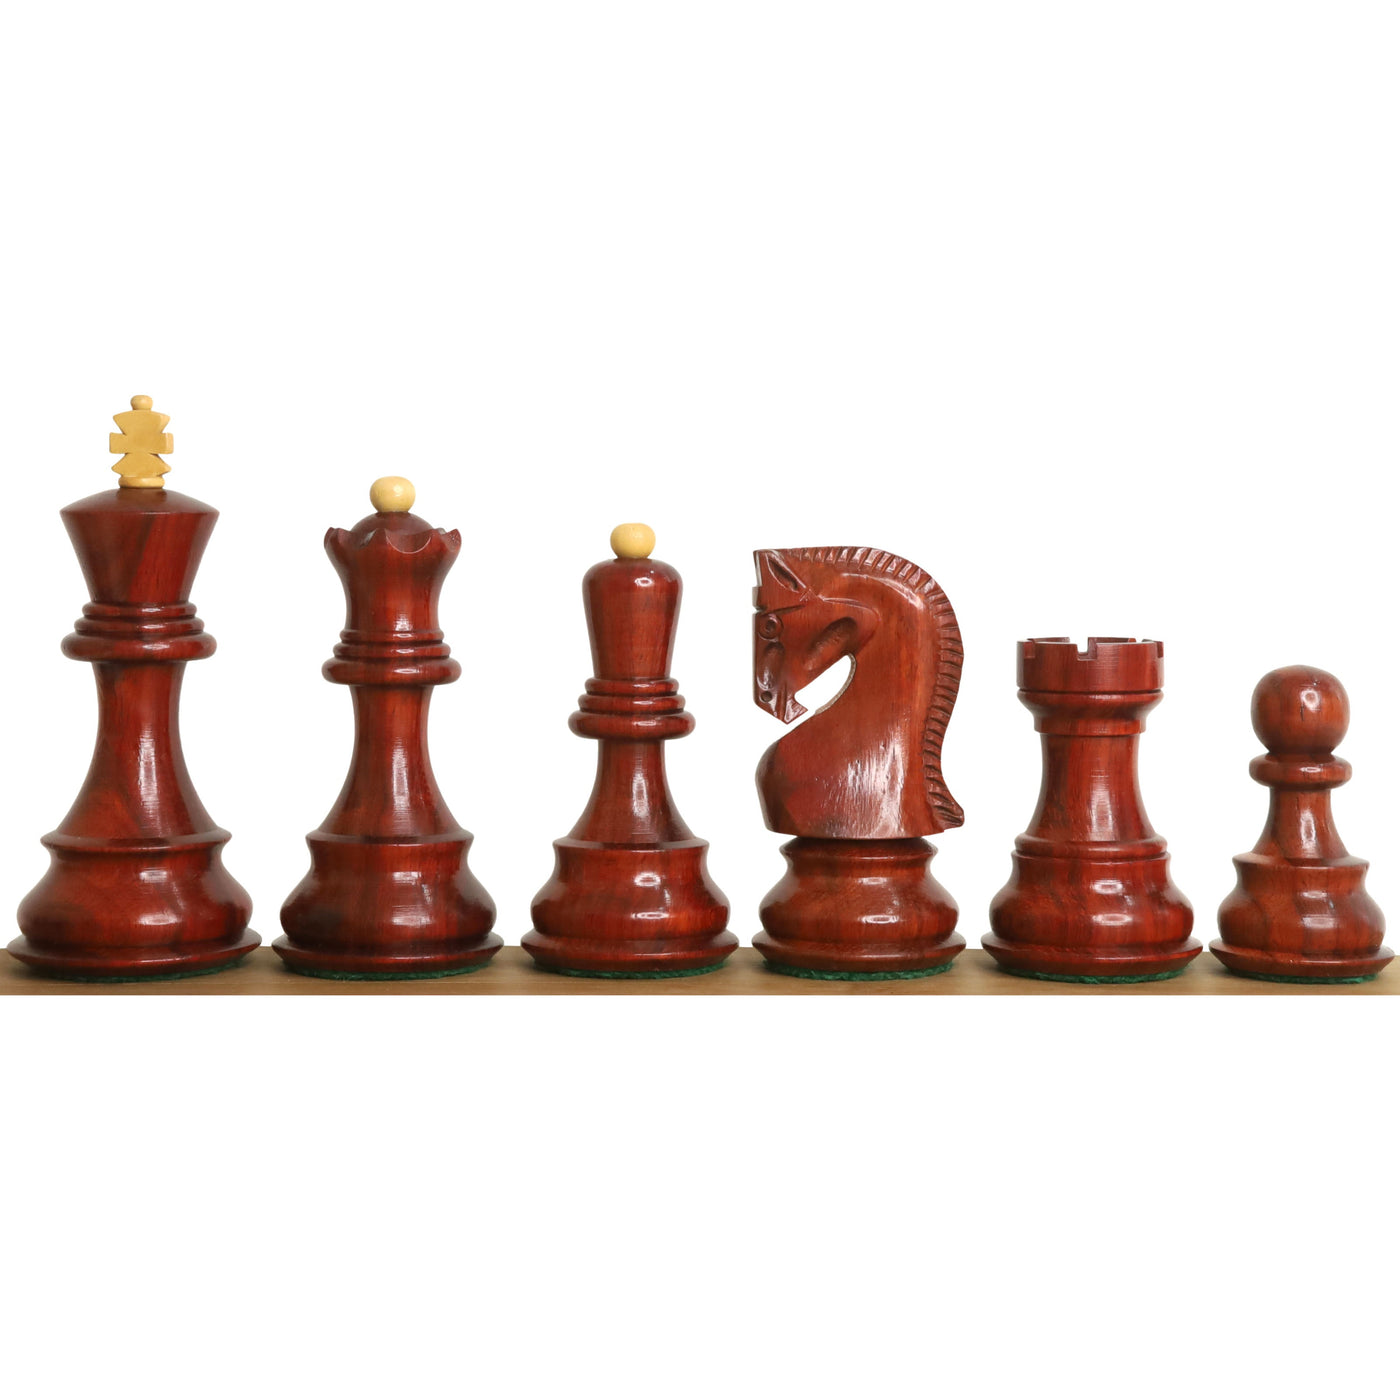 3.9" Russian Zagreb 59' Chess Set - Chess Pieces Only - Double Weighted Bud Rose Wood